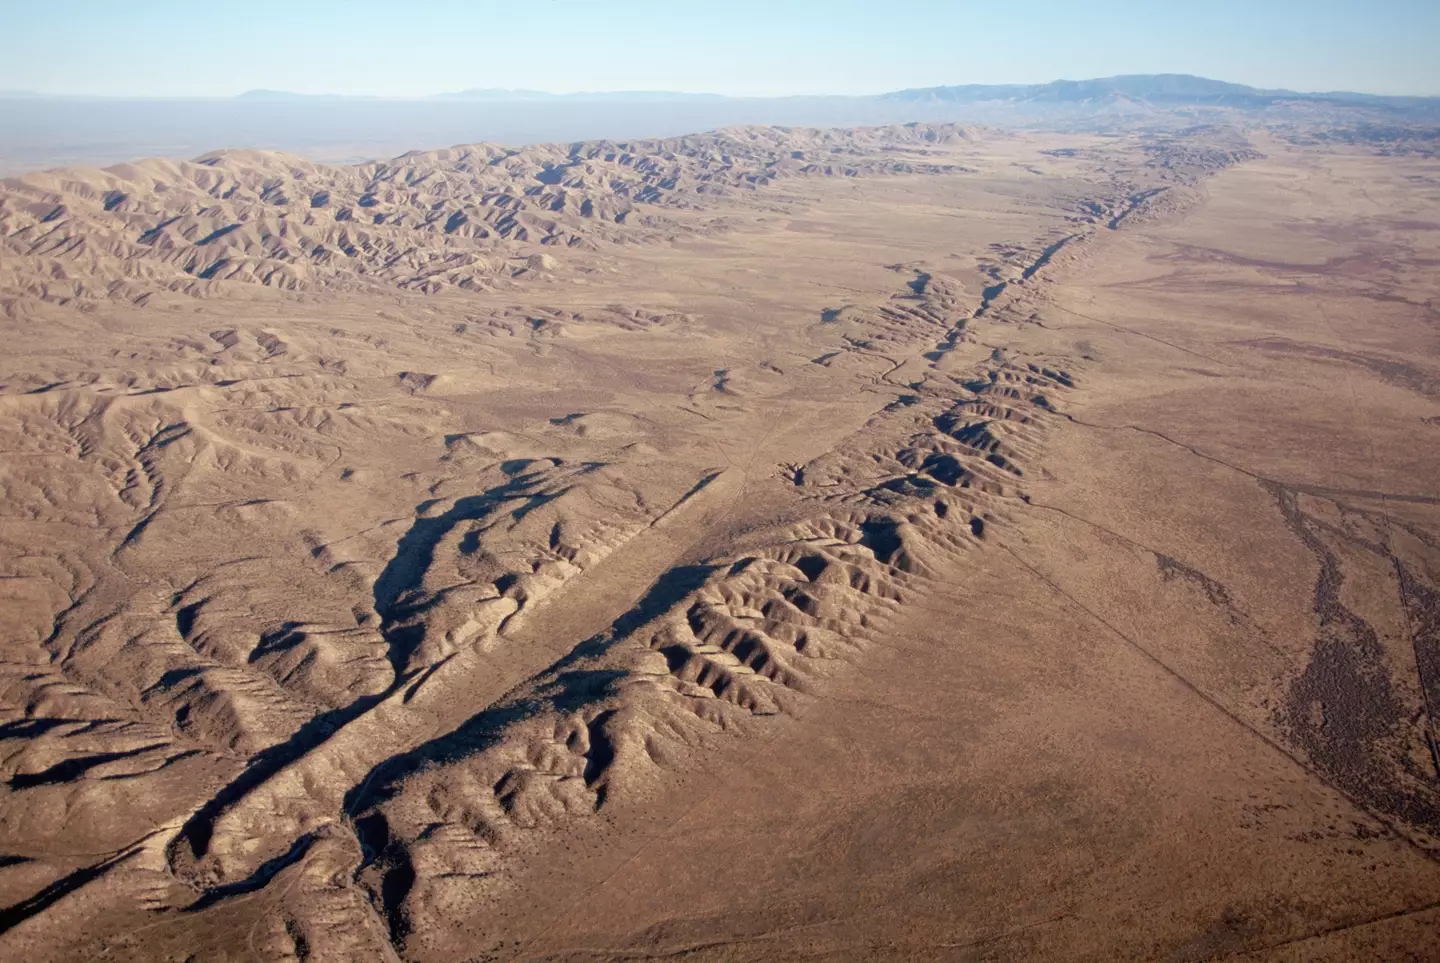 Geologists are worried a destructive earthquake may be imminent.